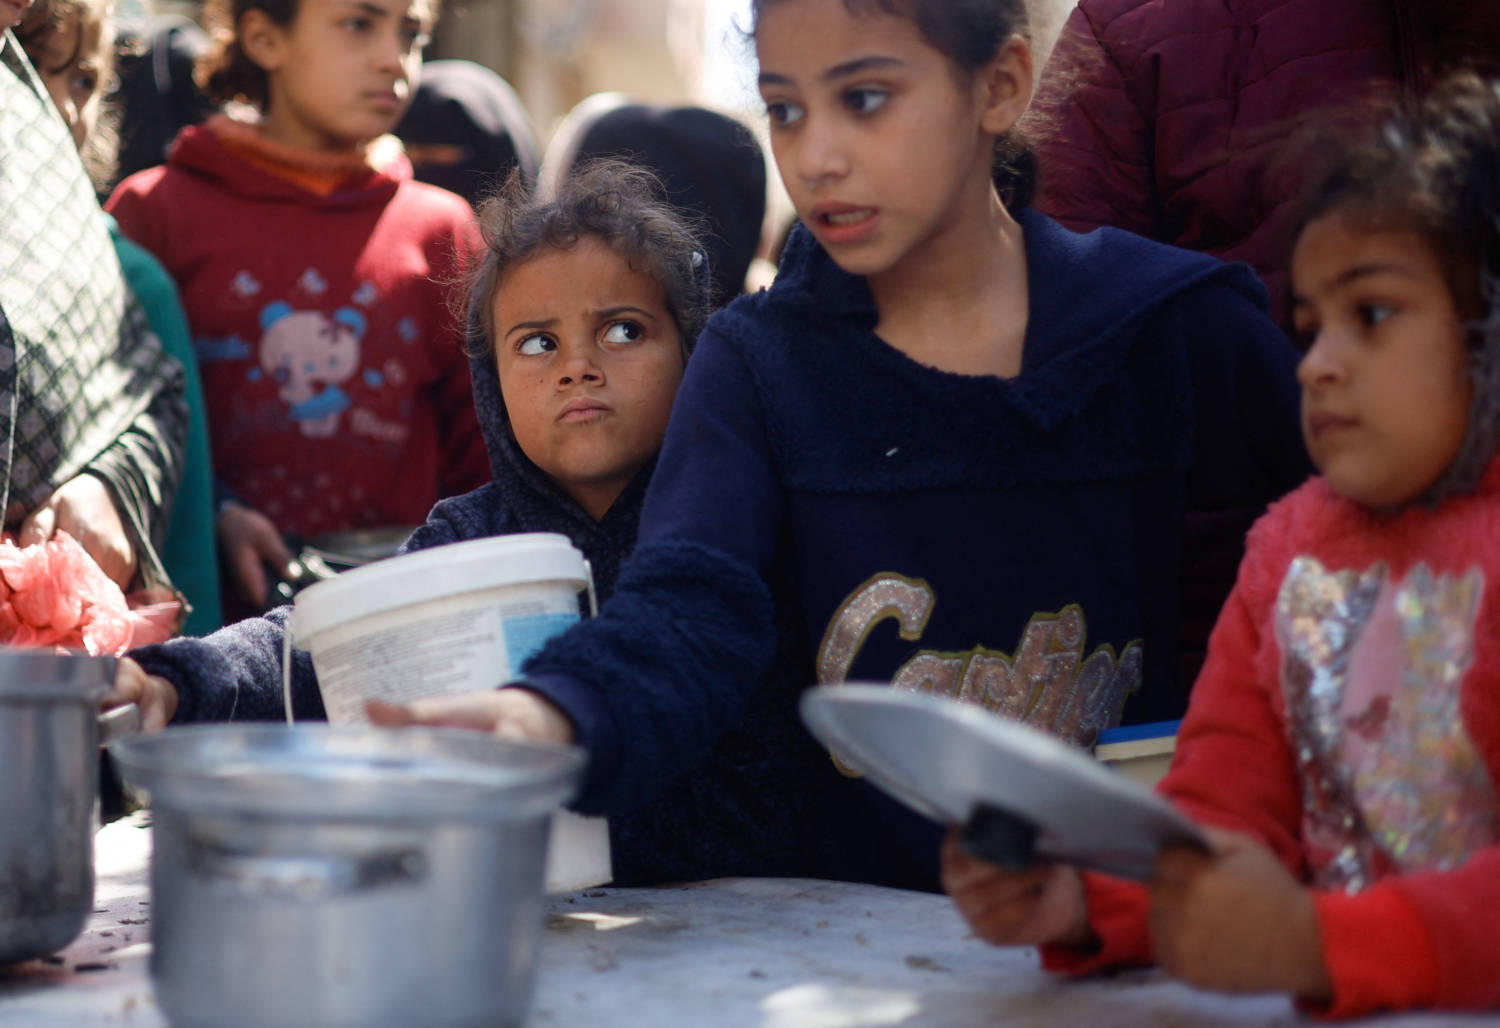 Palestinian Children Wait To Receive Food Cooked By A Charity Kitchen Amid Shortages Of Food Supplies, In Rafah